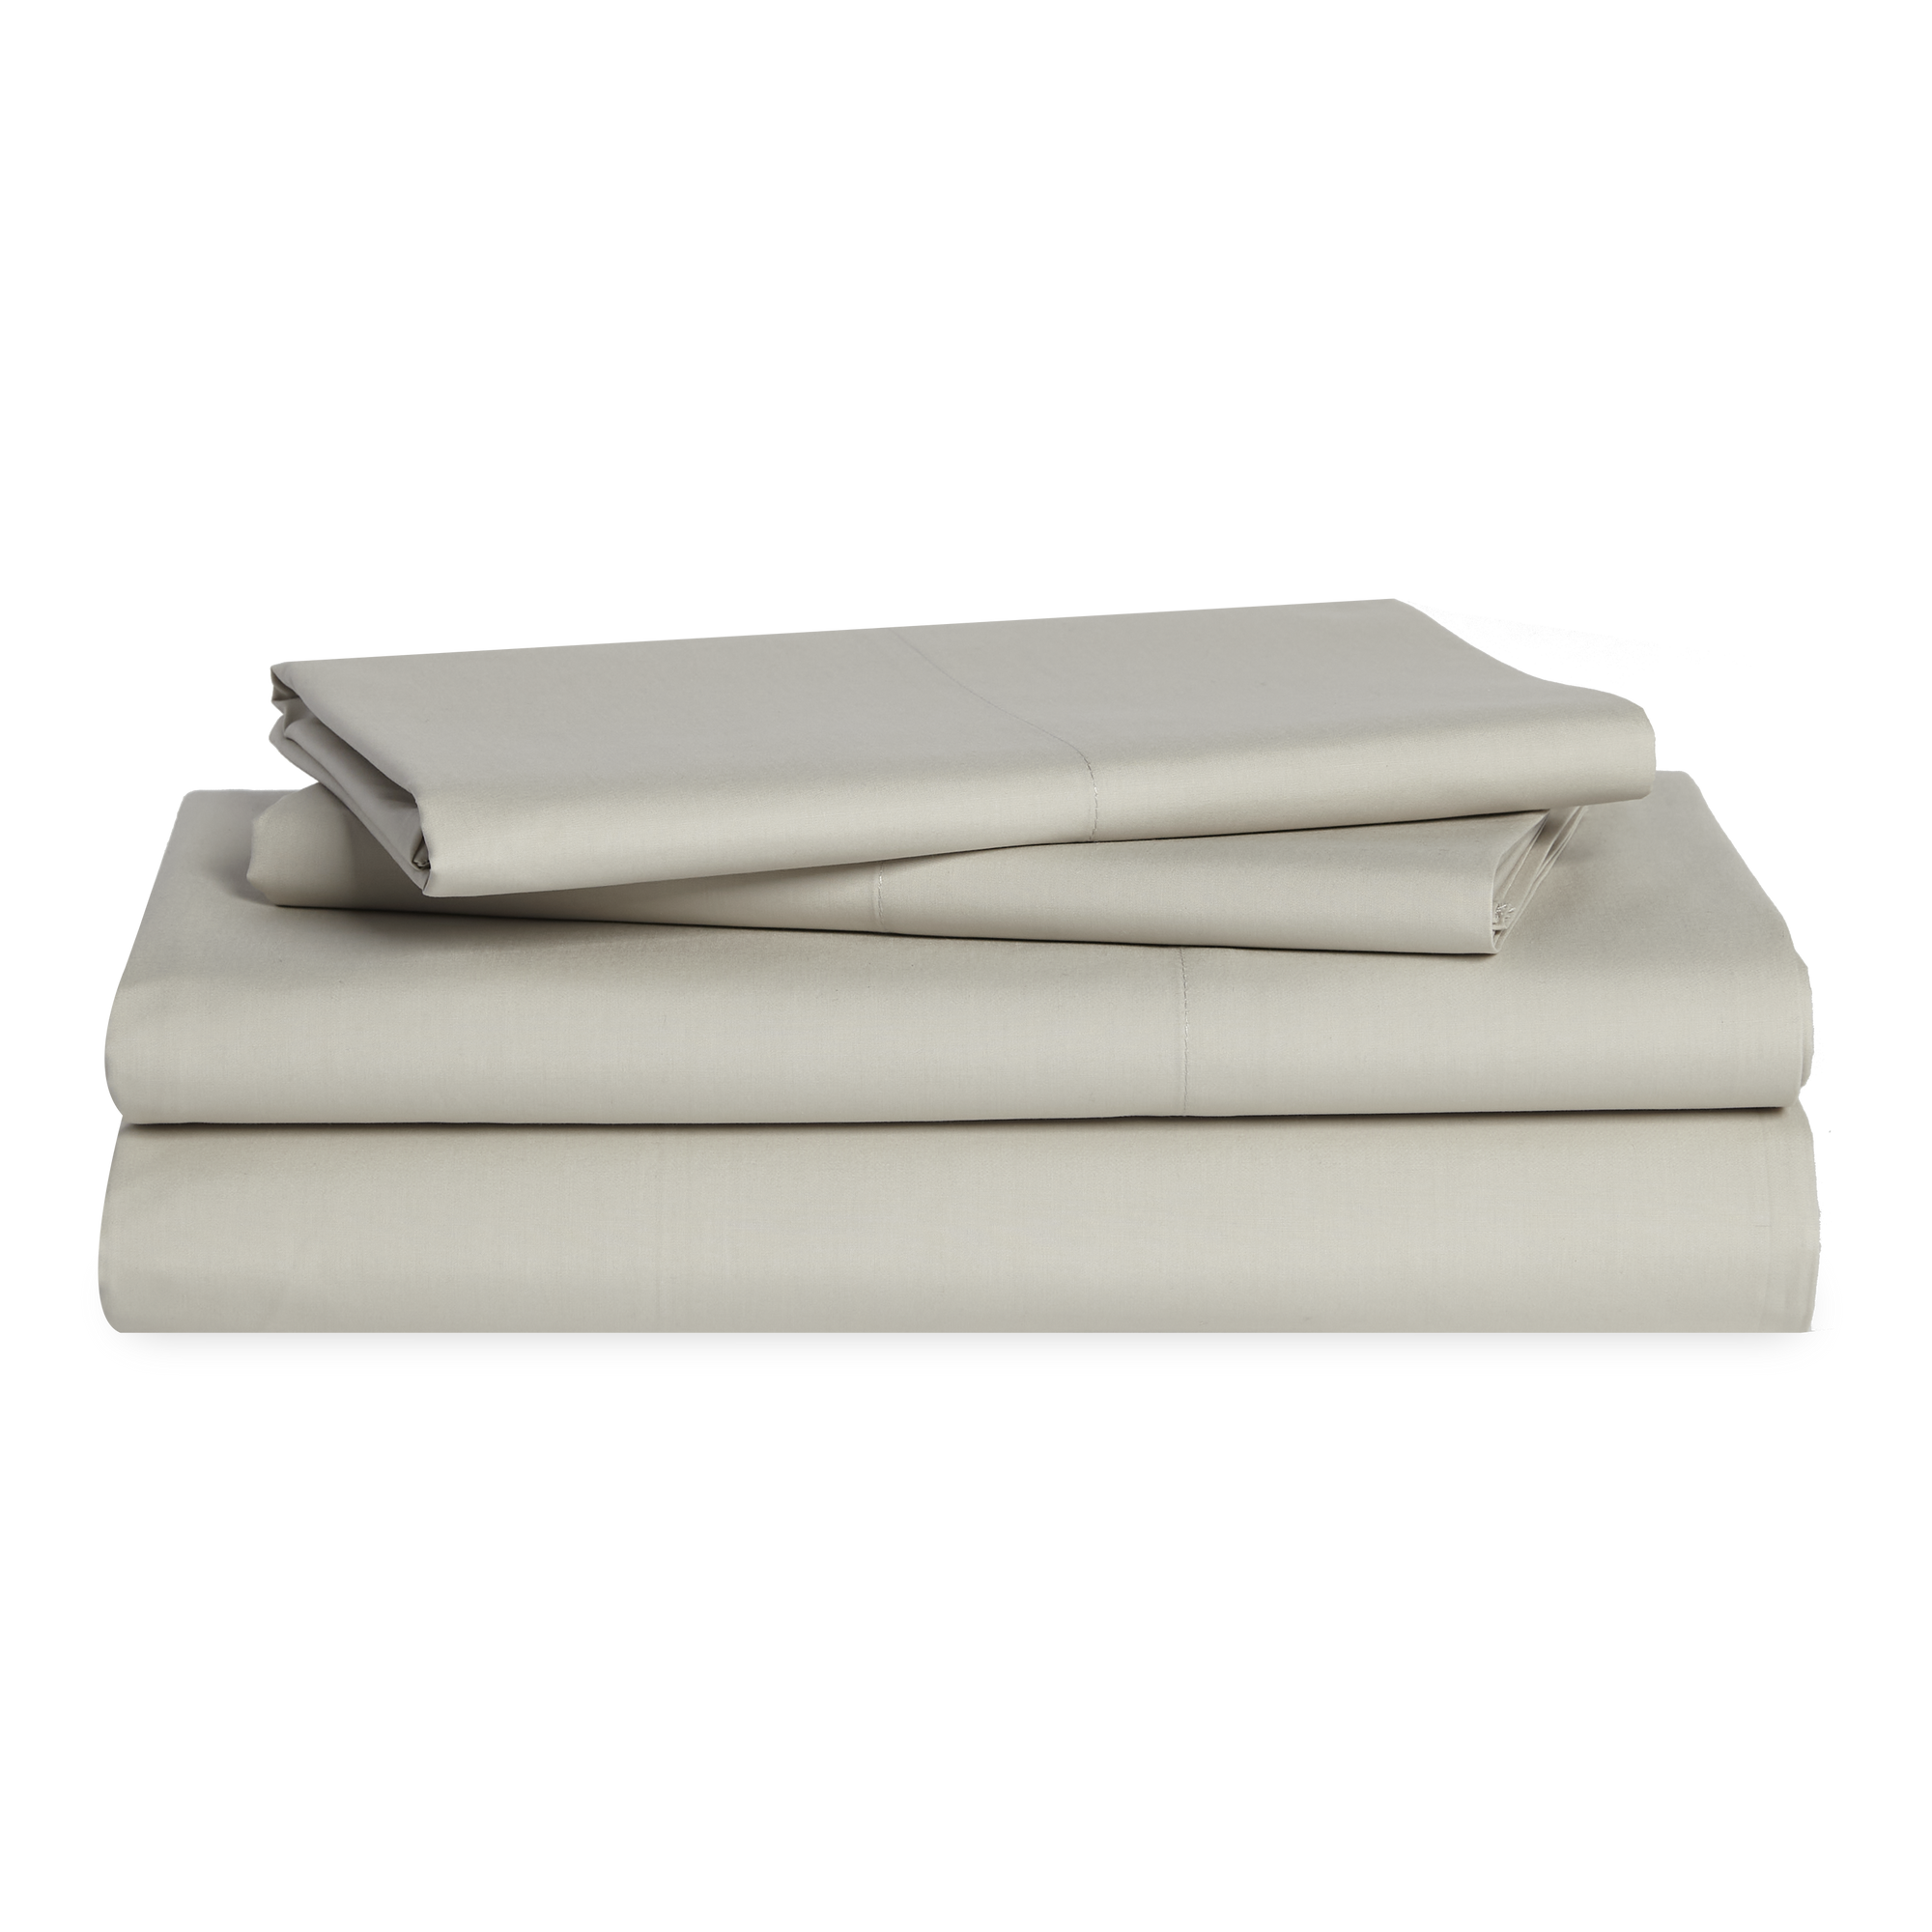 Produced in Italy exclusively for Elte, the Paradigm Collection is made from 100% cotton percale for a crisp and matte look.